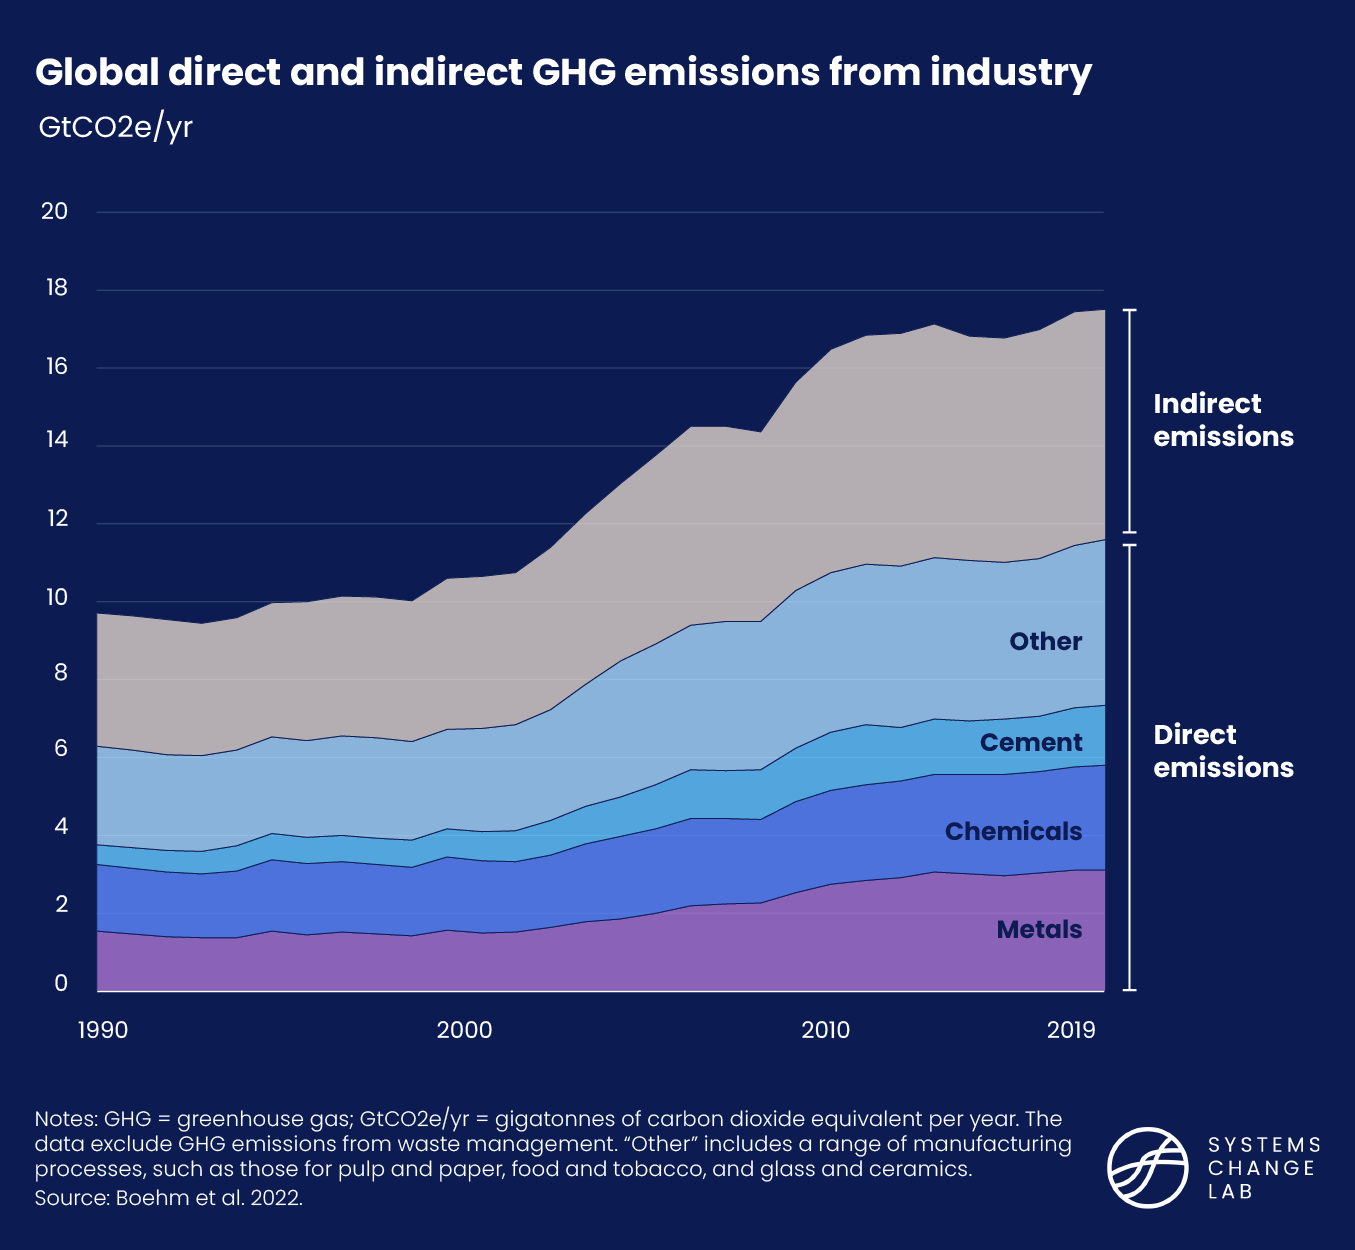 Global direct and indirect GHG emissions from industry, disaggregated